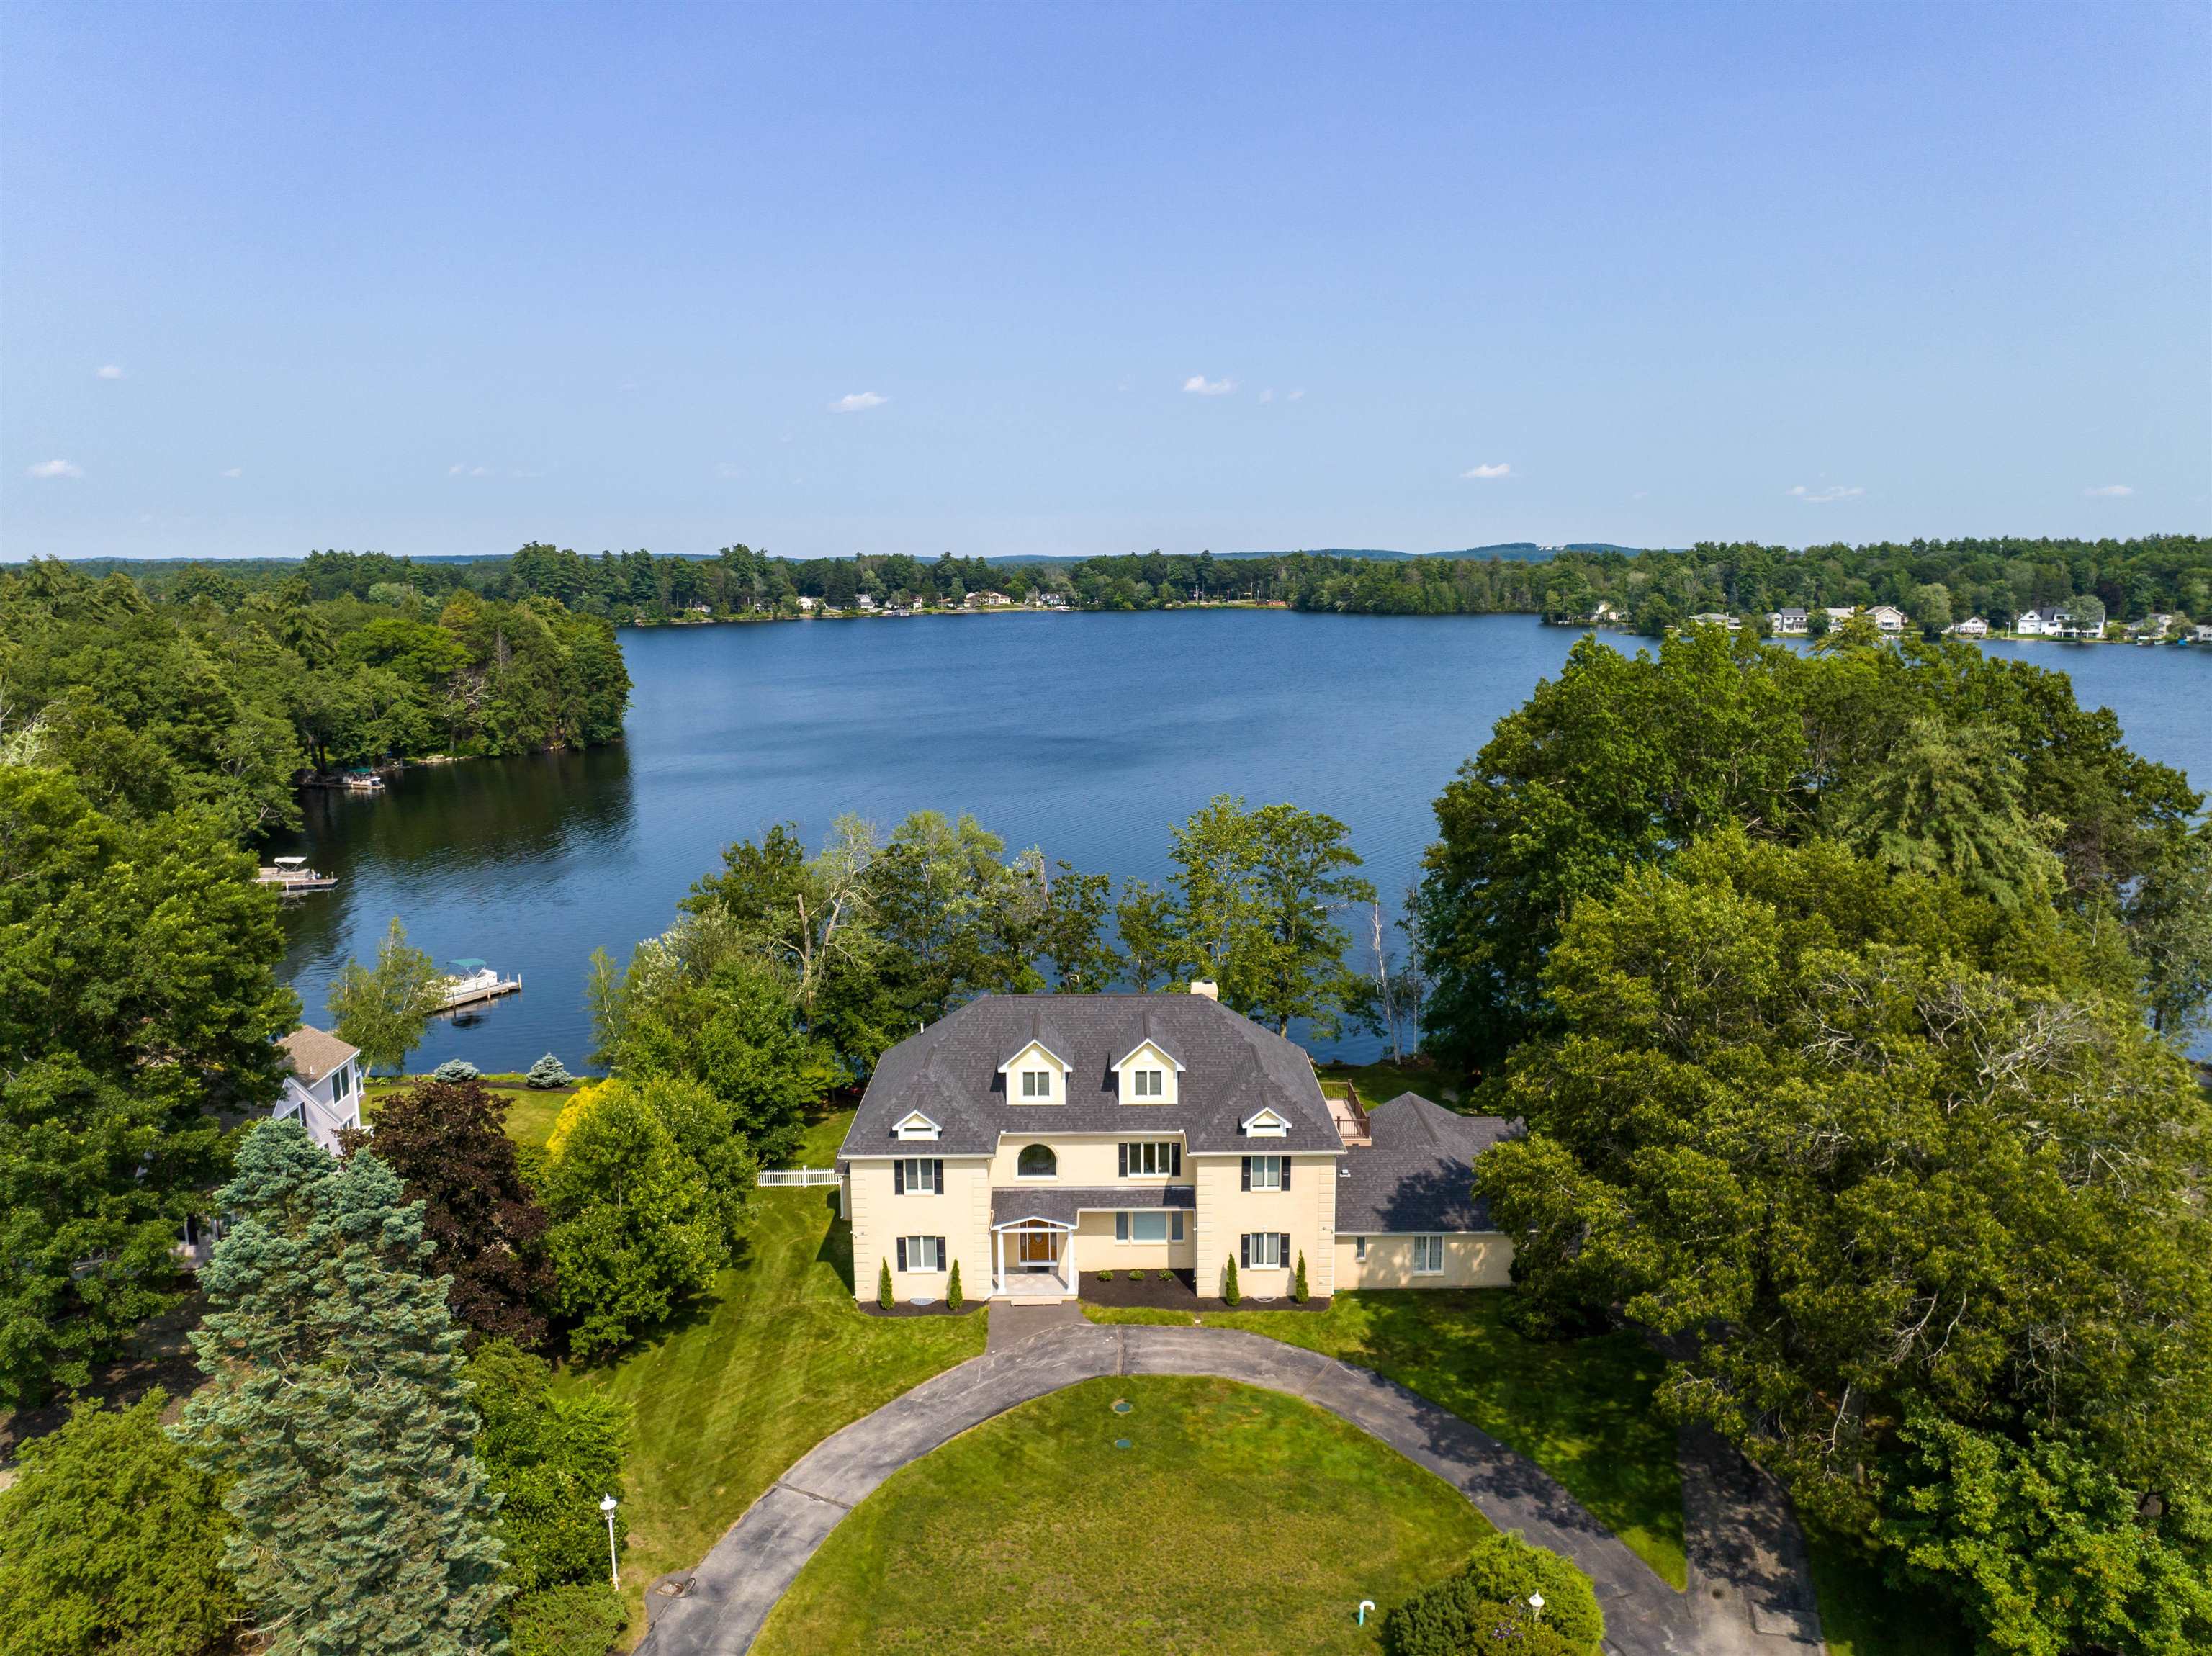 EXPANSIVE WATERFRONT Welcome to the epitome of waterfront luxury on Canobie Lake! This exquisite 7,600+ sq ft residence is a haven of elegance and tranquility, boasting an impressive 215' of pristine water frontage. As you step into the grand foyer, you'll immediately be captivated by the sheer beauty and opulence that define this property. The main floor offers a seamless flow from room to room, featuring an expansive family room adorned with a charming fireplace, formal dining room and well appointed office. Large windows throughout allow for an abundance of light and breathtaking views. You will be inspired by the amazing kitchen equipped with a large center island, state of the art appliances and butler's pantry - every chef's dream kitchen! This home offers two primary suites, one on each floor - to cater to your utmost comfort and privacy. Wake up each morning to the soothing sounds of the lake and breathtaking views from your private balcony or terrace. Two additional en-suite bedrooms, each offering its own private balcony, ensure everyone enjoys a retreat-like experience as well as a second floor loft. A finished third floor offers endless possibilities. With an impeccable design, breathtaking views, and lavish amenities, this home is sure to surpass all your expectations. Close to shopping, dining and minutes to Rte 93!